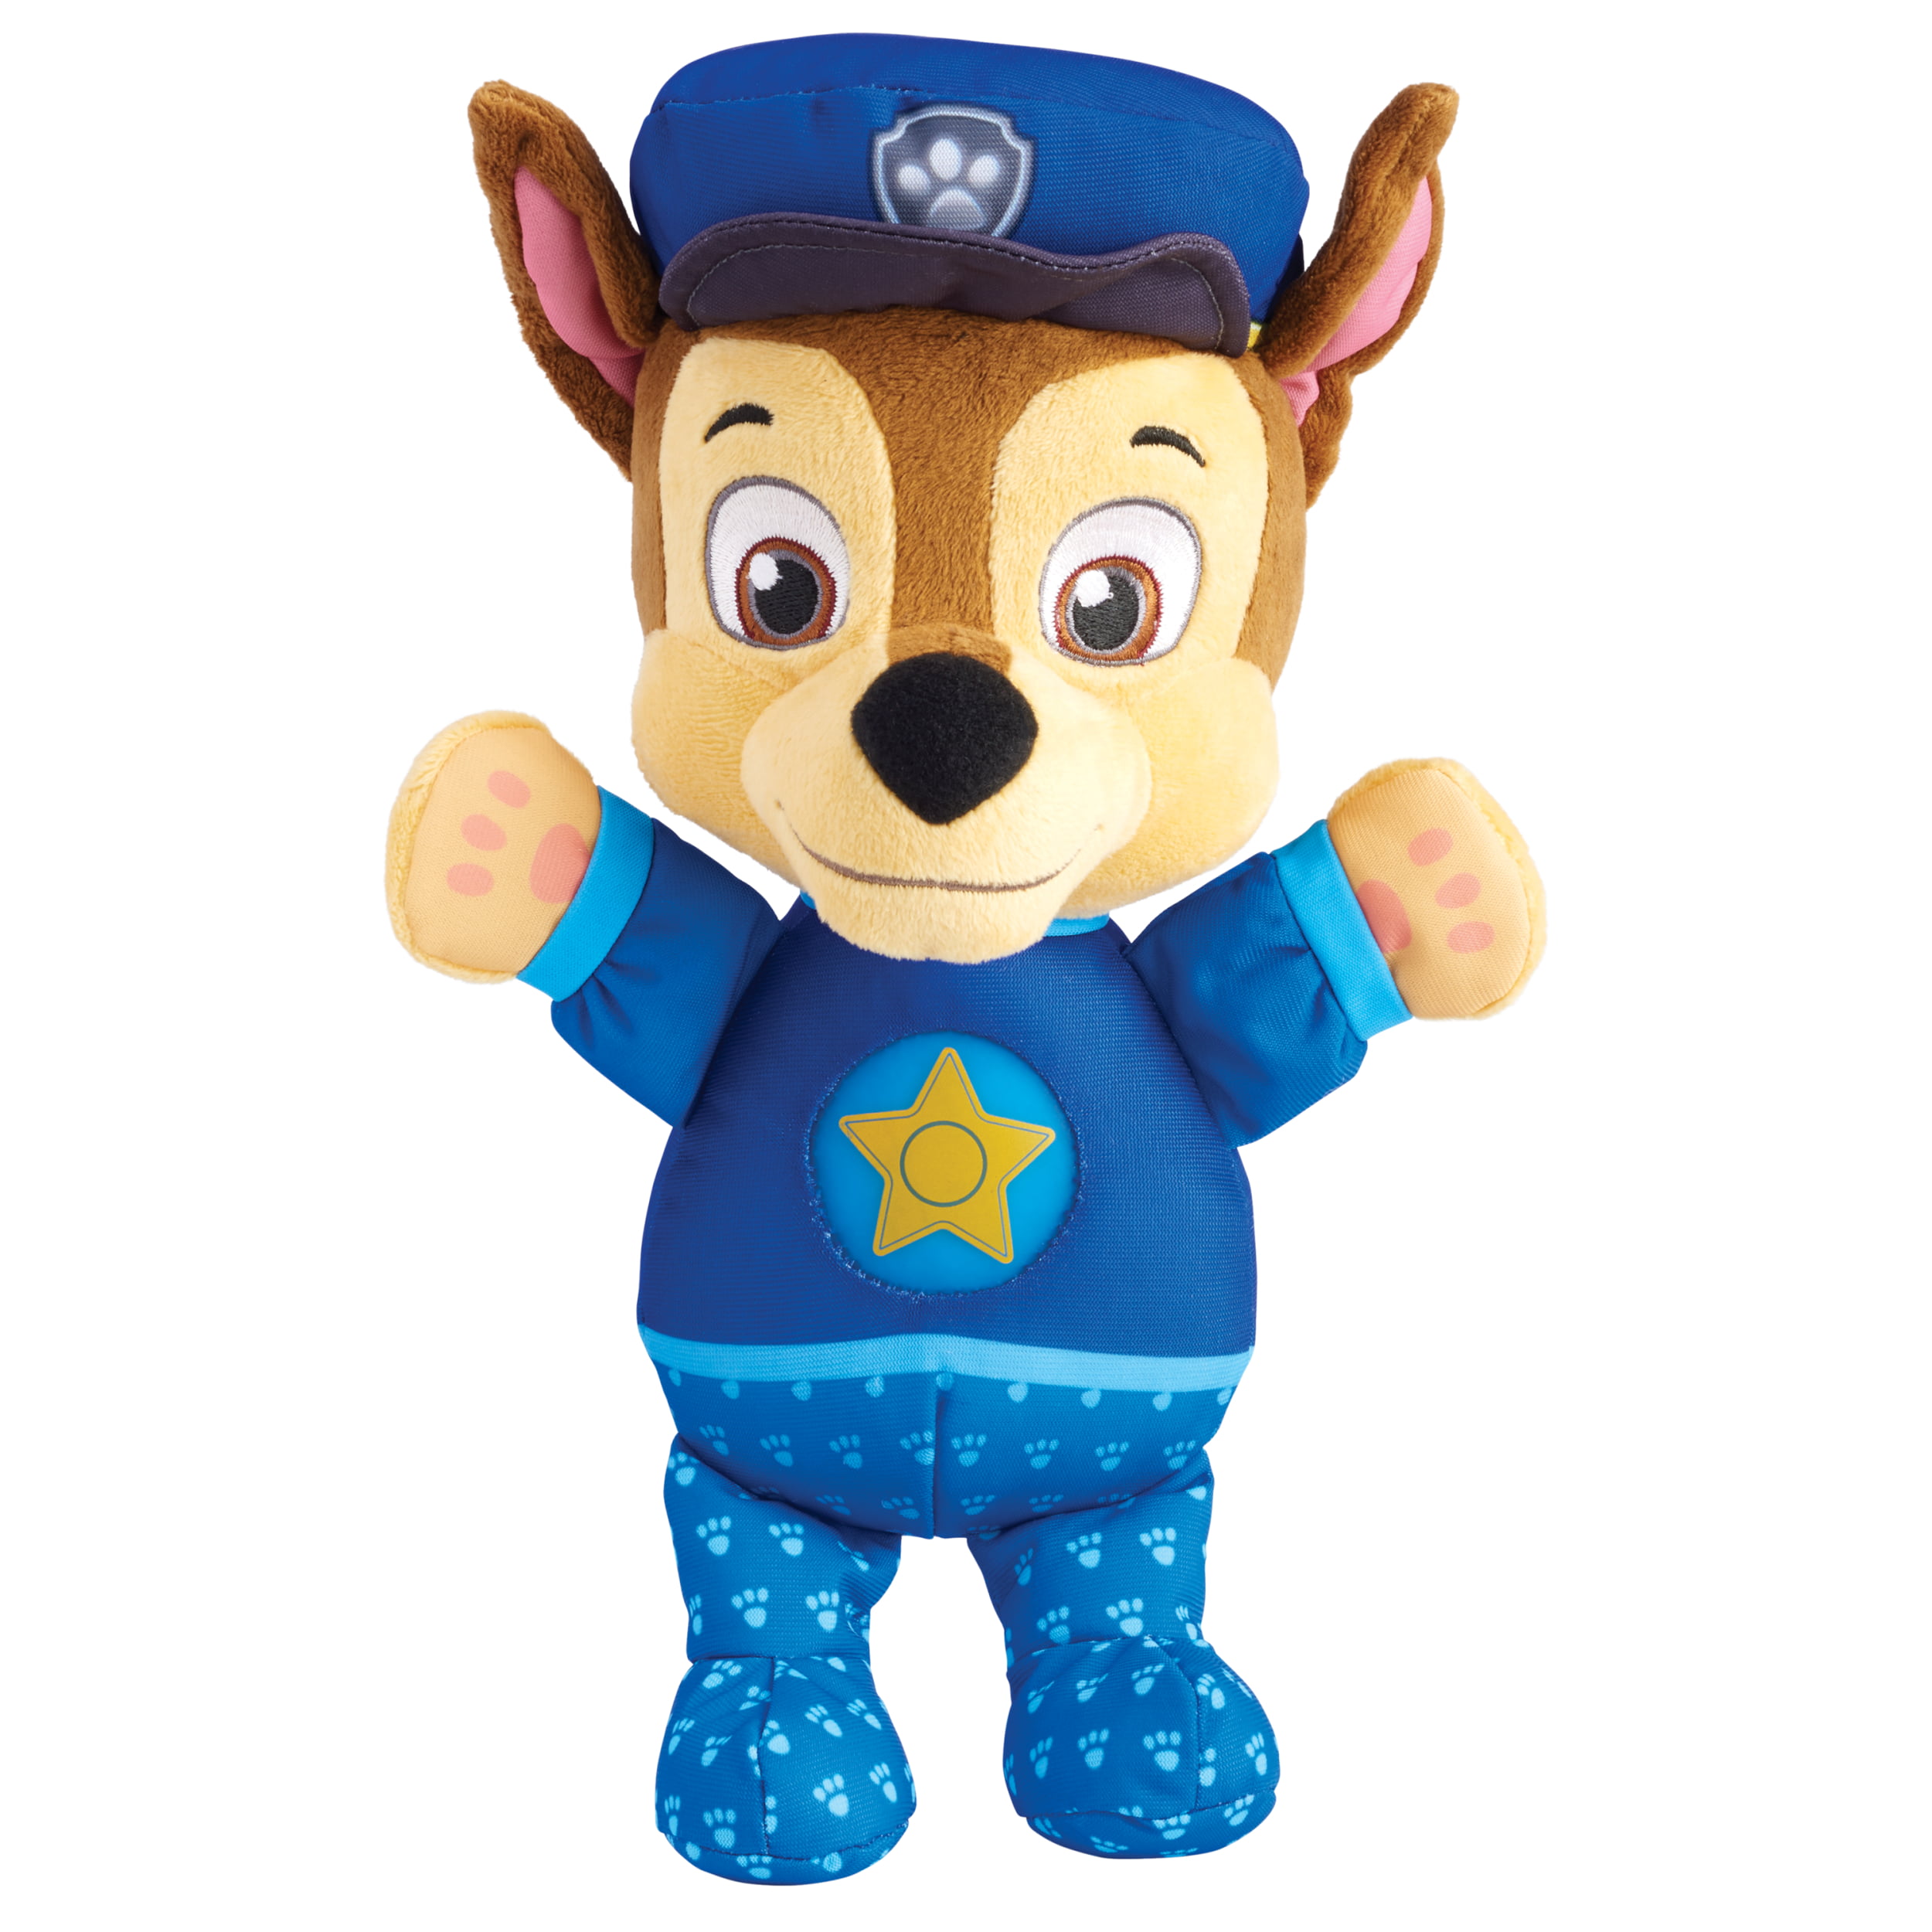 Details about   * NEW Kayleigh & Co. PAW Patrol Snuggle U Pup Chase W/ Flashlight Plush Toy